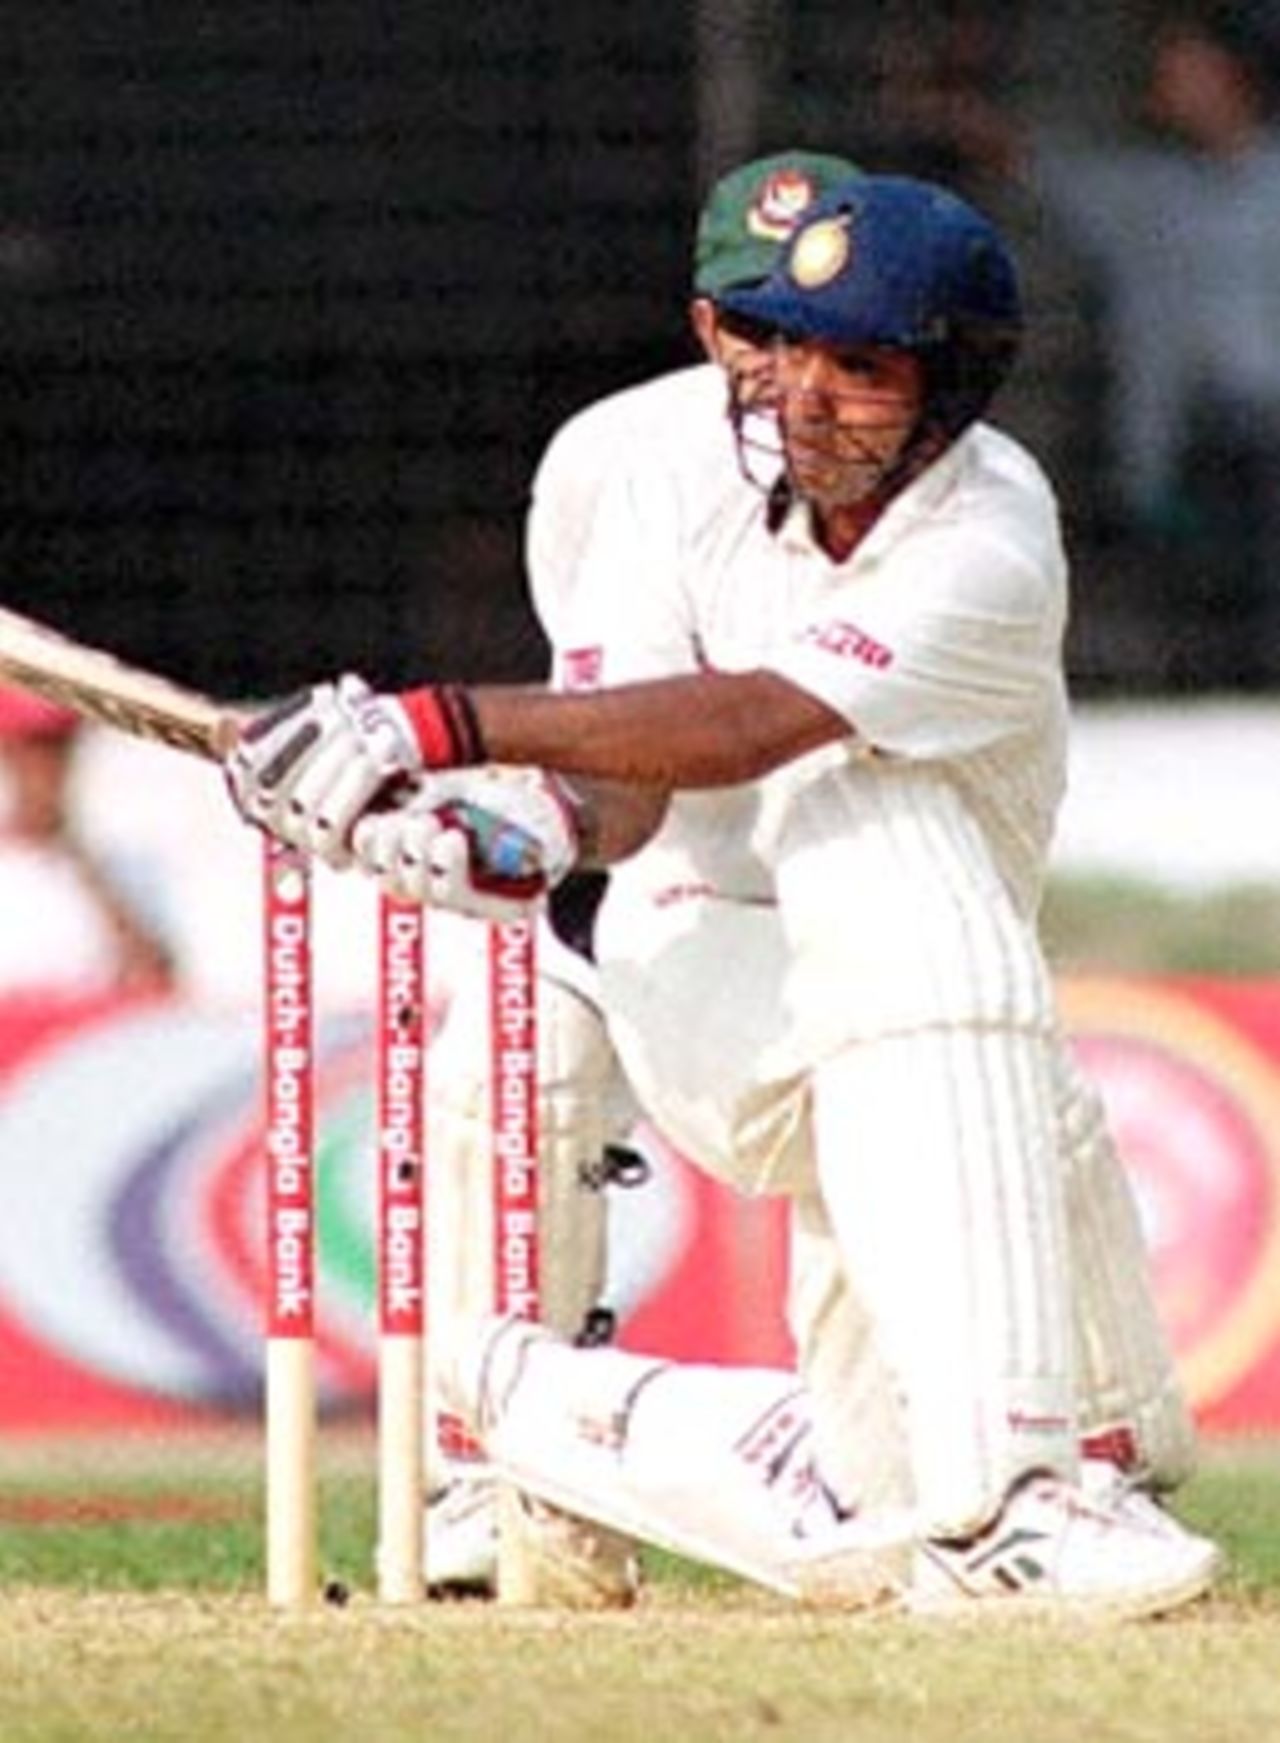 Indian batsman Sunil Joshi (R front) hits a ball off Bangladeshi skipper Naimur Rhaman (not in the picture) 12 November 2000 at the Bangabandhu National Stadium on the third day of this South Asian country's inaugural Test match against India. Sunil hit 71 runs being not out as India scored 366 for 7 wickets after the third day's play.